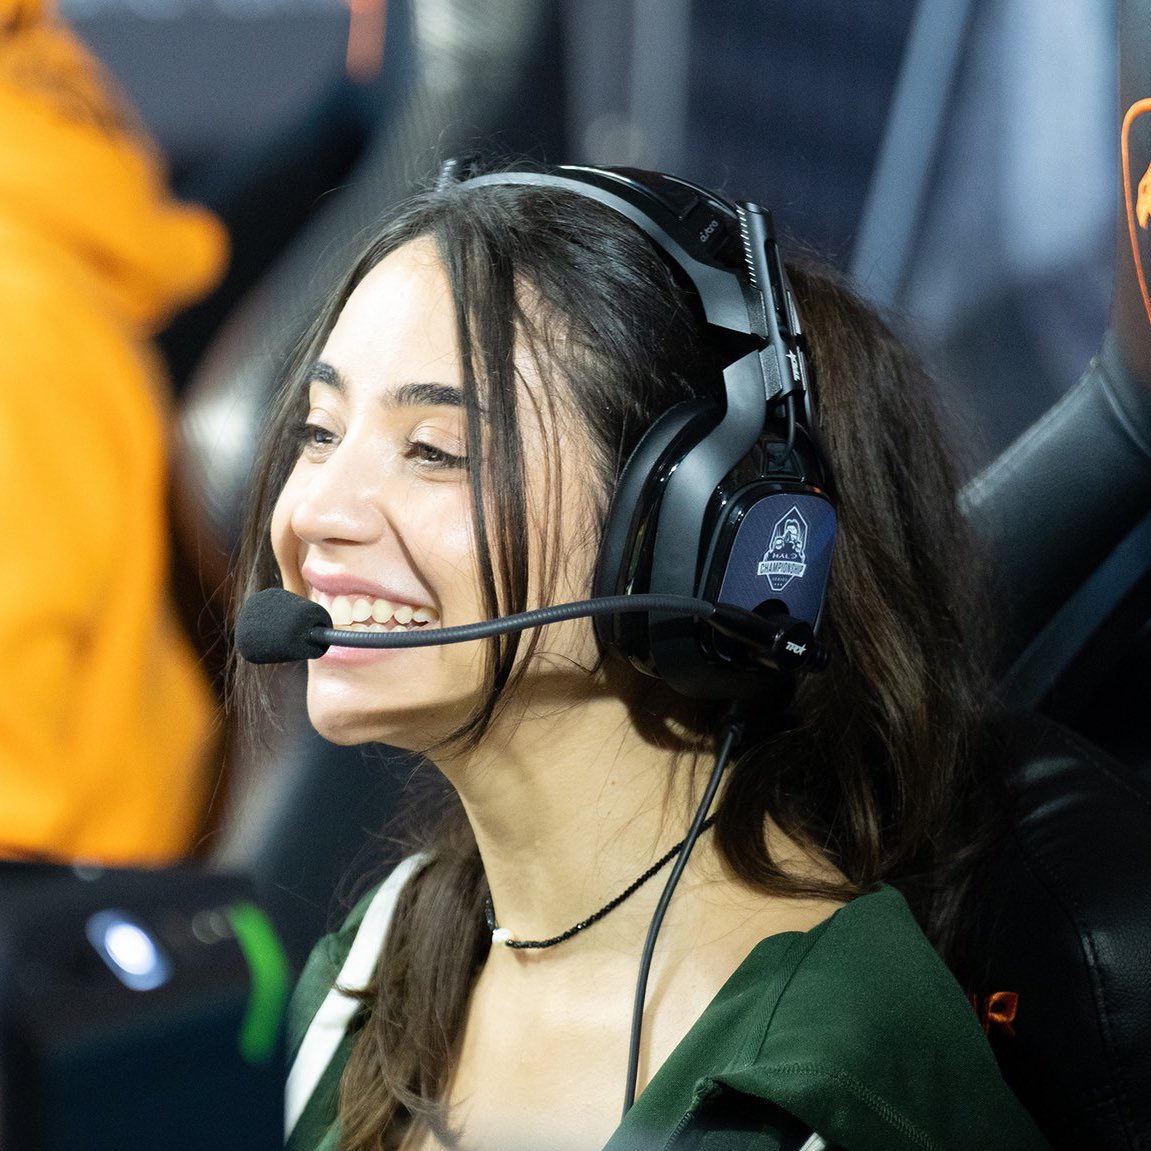 As a Halo fan and content creator, this weekend was a dream. My 15 year old self would never believe she’d get to be on main stage playing her favorite game. Im so grateful to everyone rooting for me on my journey so far❤️ 

Thank you 343 for making me a part of #halowc this year